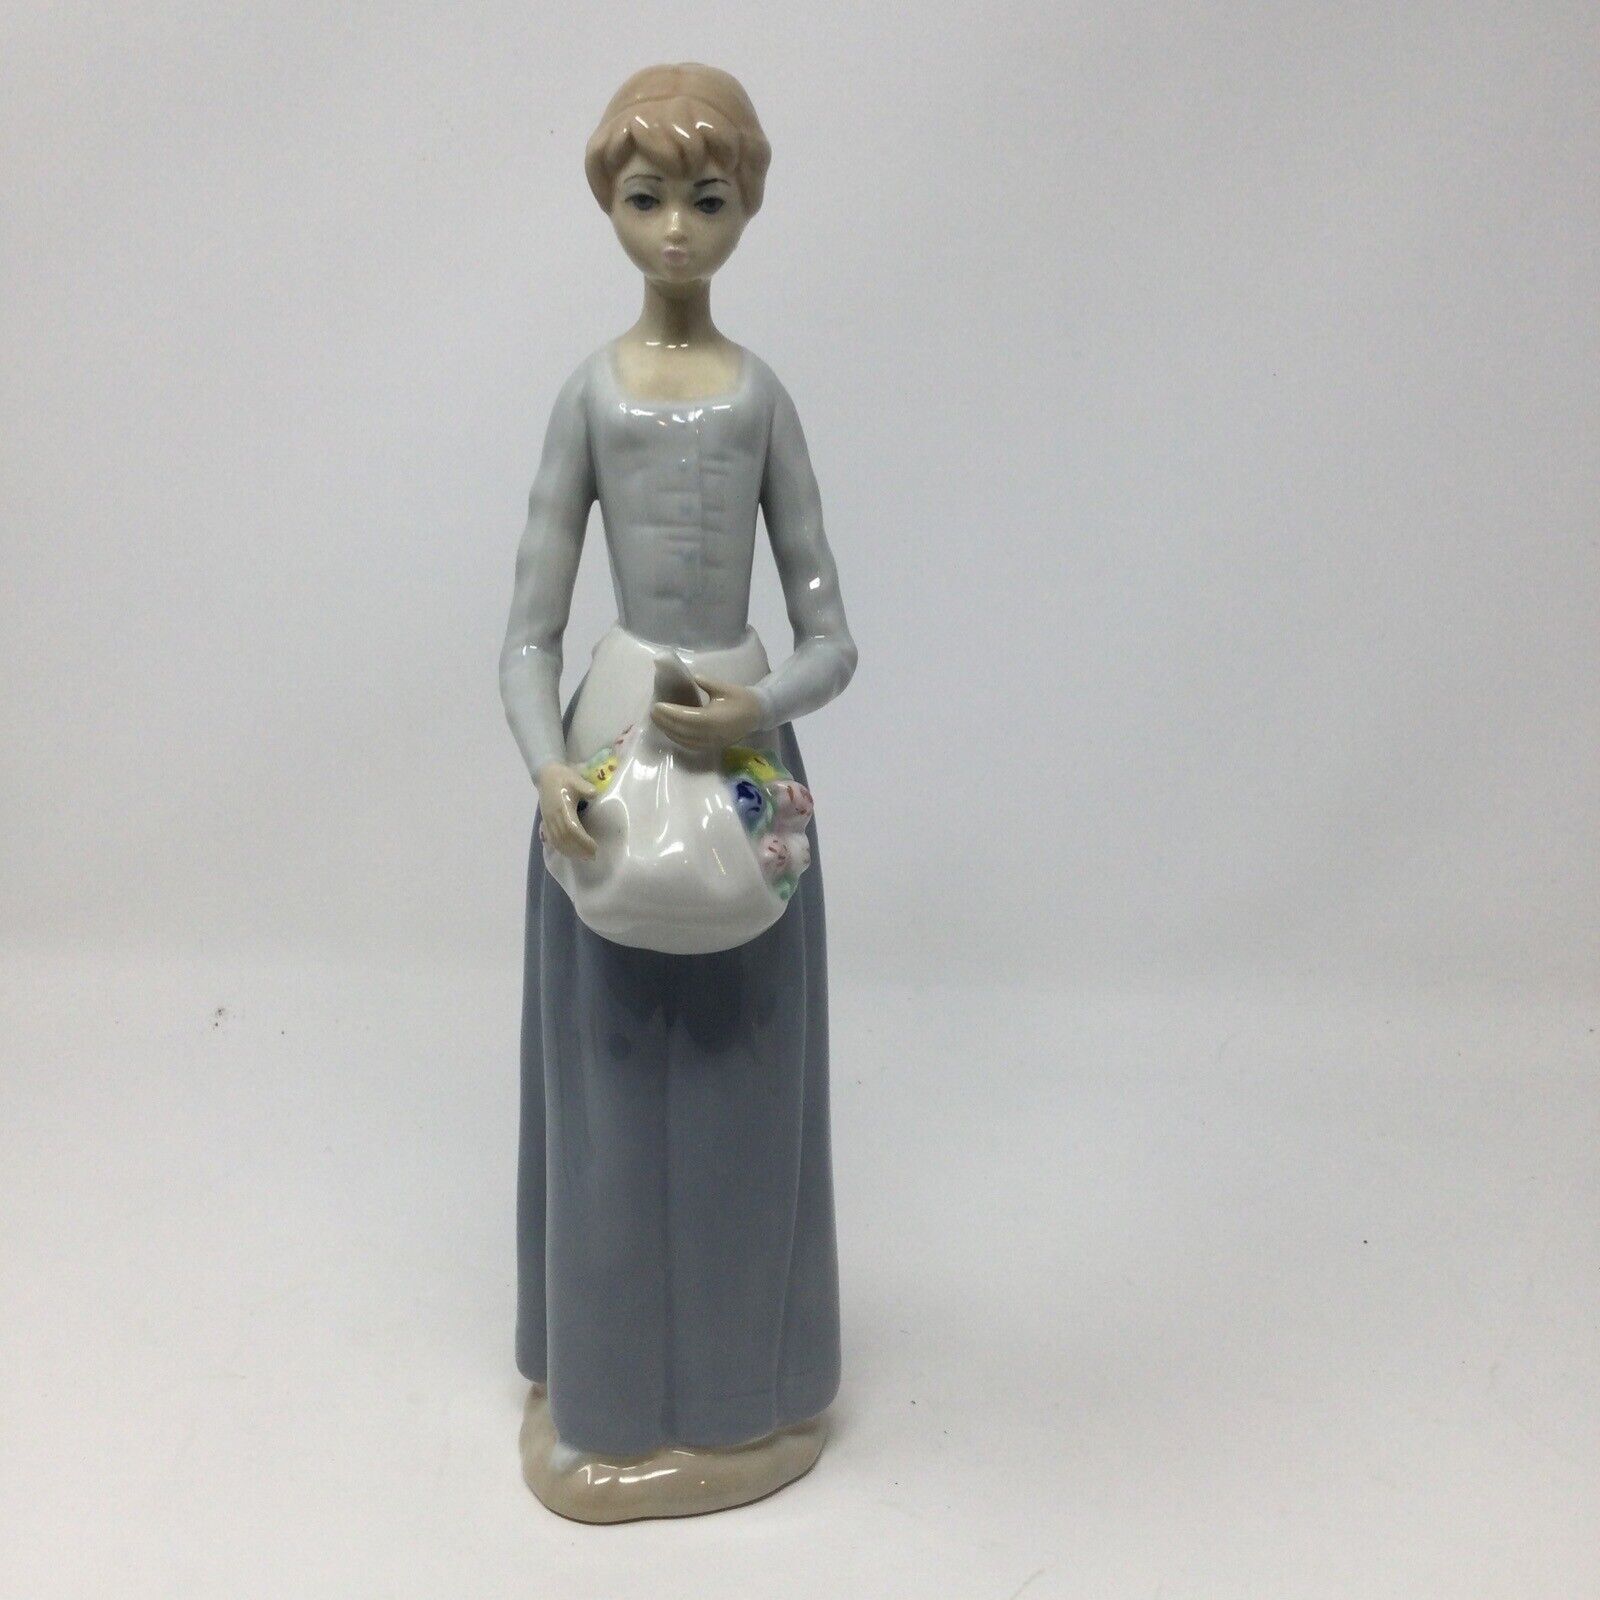 Casades Porcelain Figurine Lady With Flowers. Approximately 12”. Spain